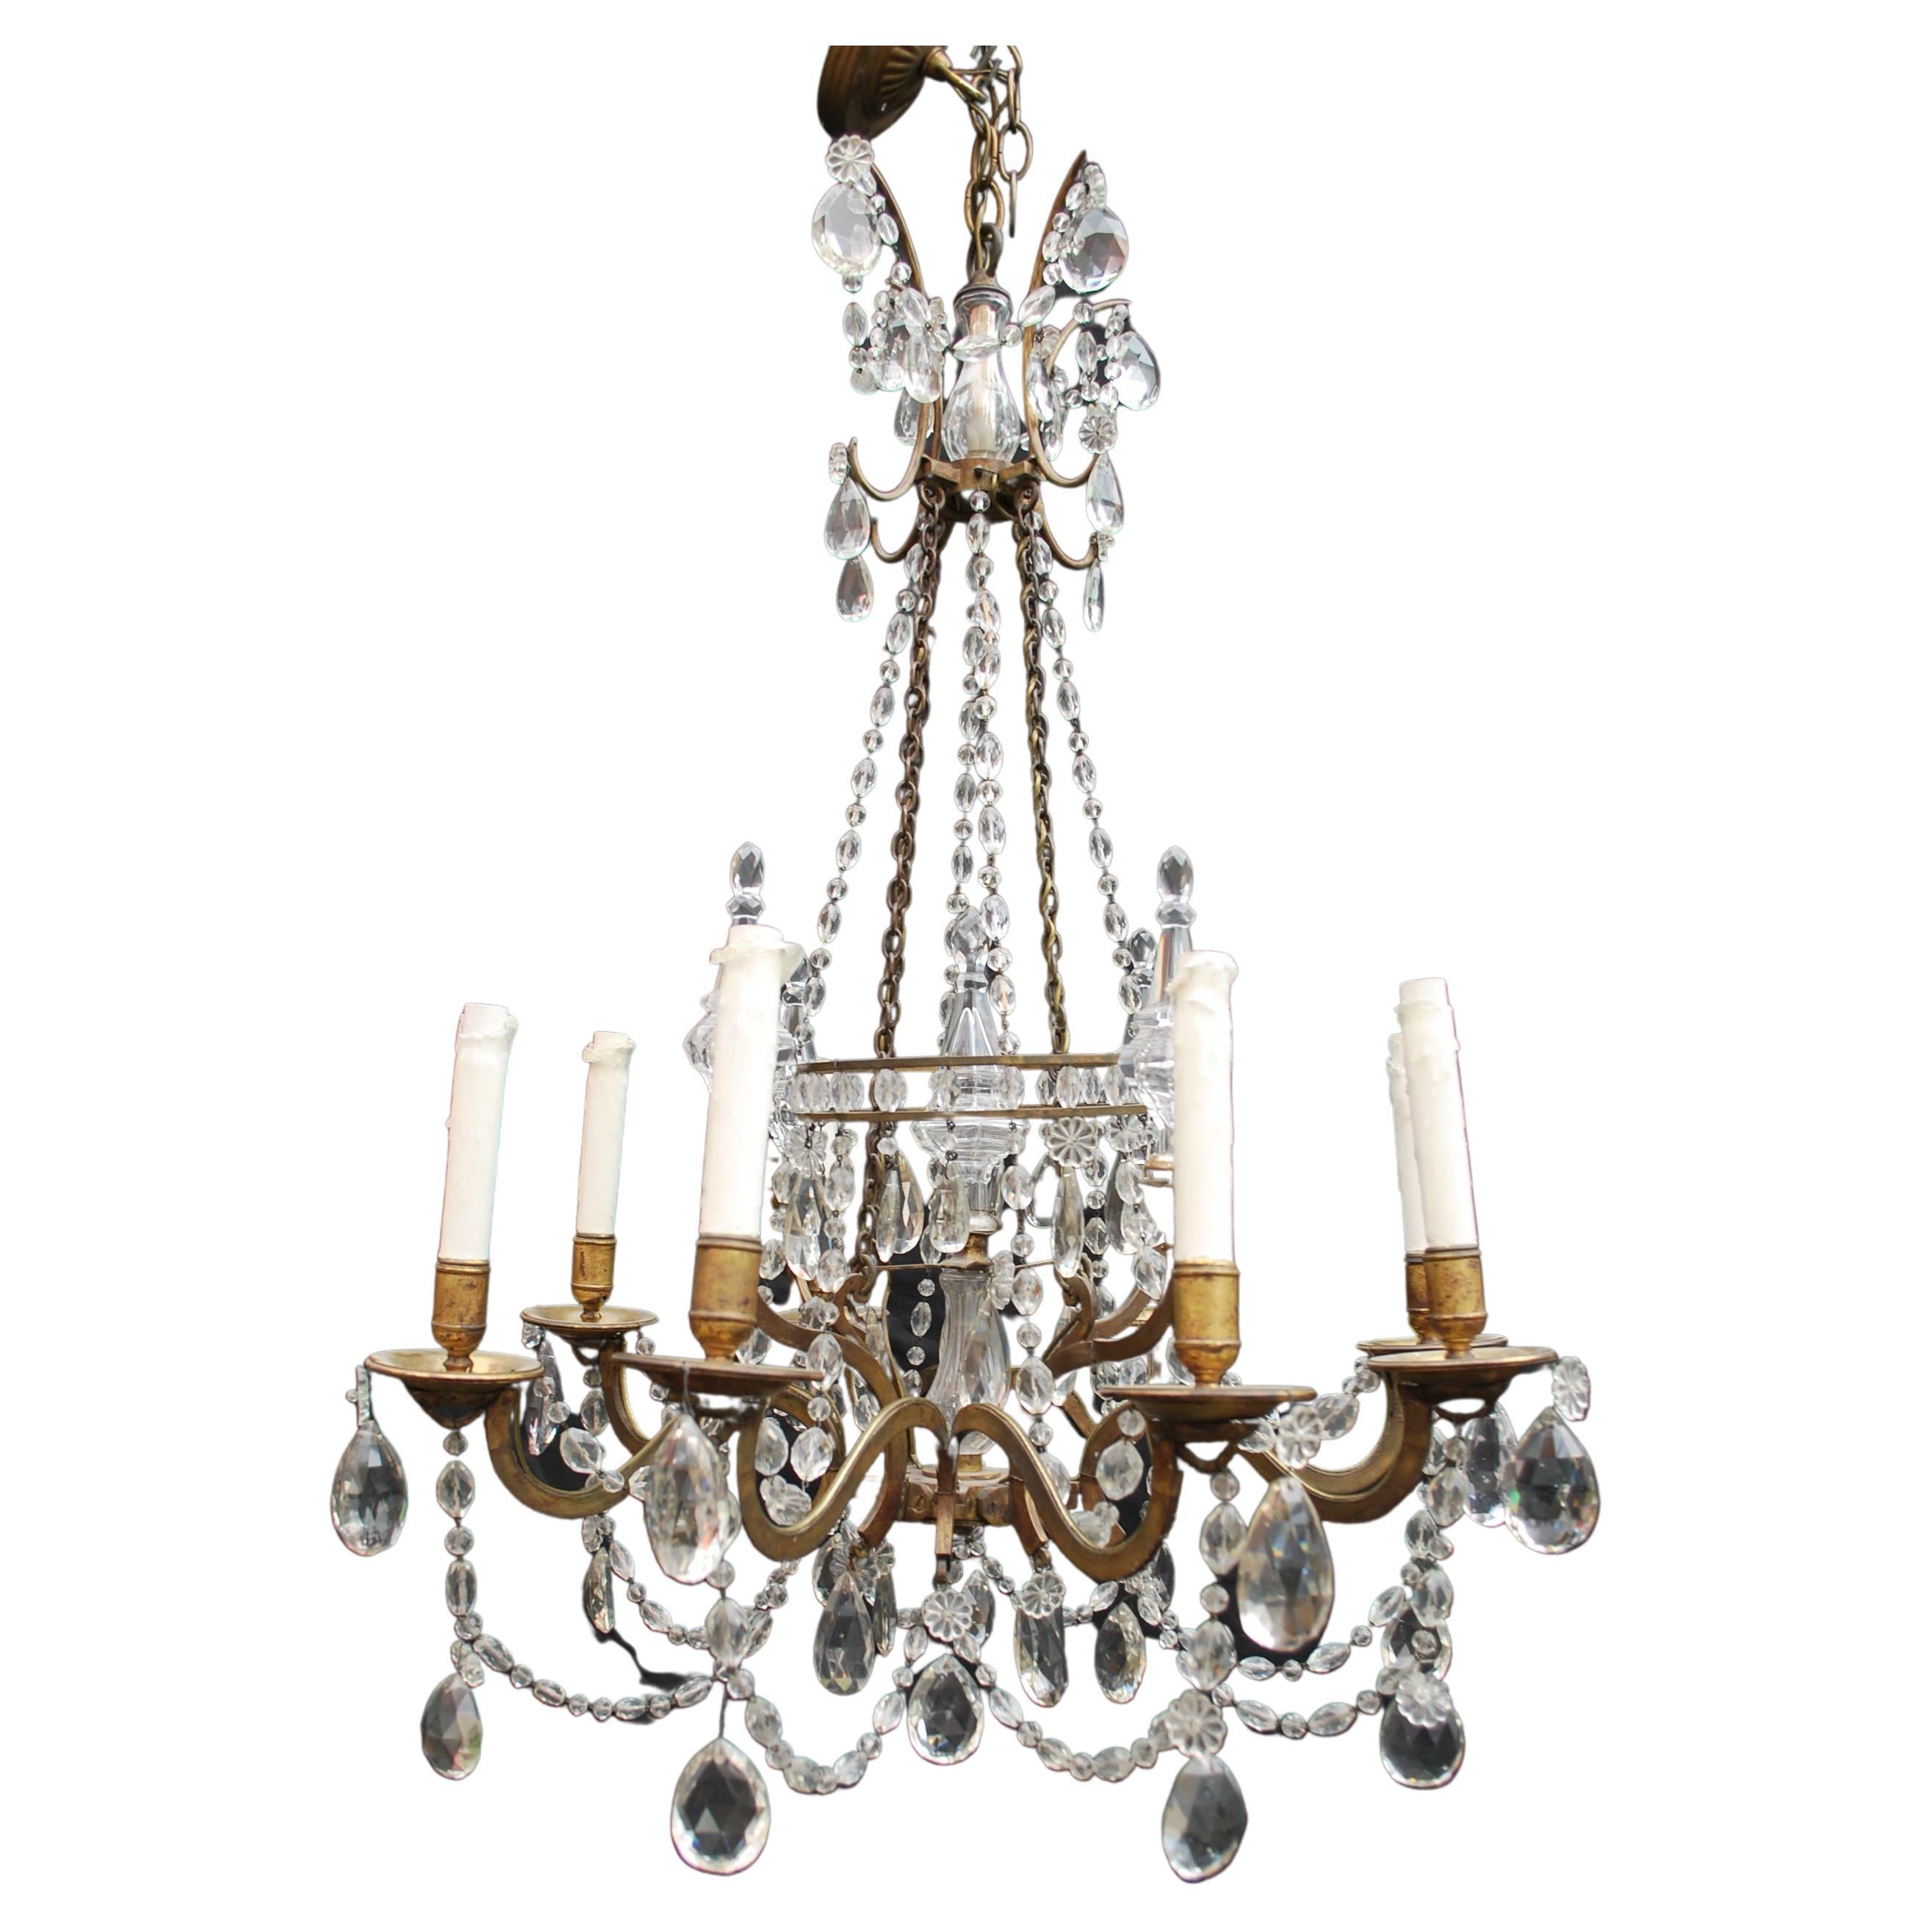 Beautiful and Elegant Late 19th Century French Bronze and Crystal Chandelier For Sale